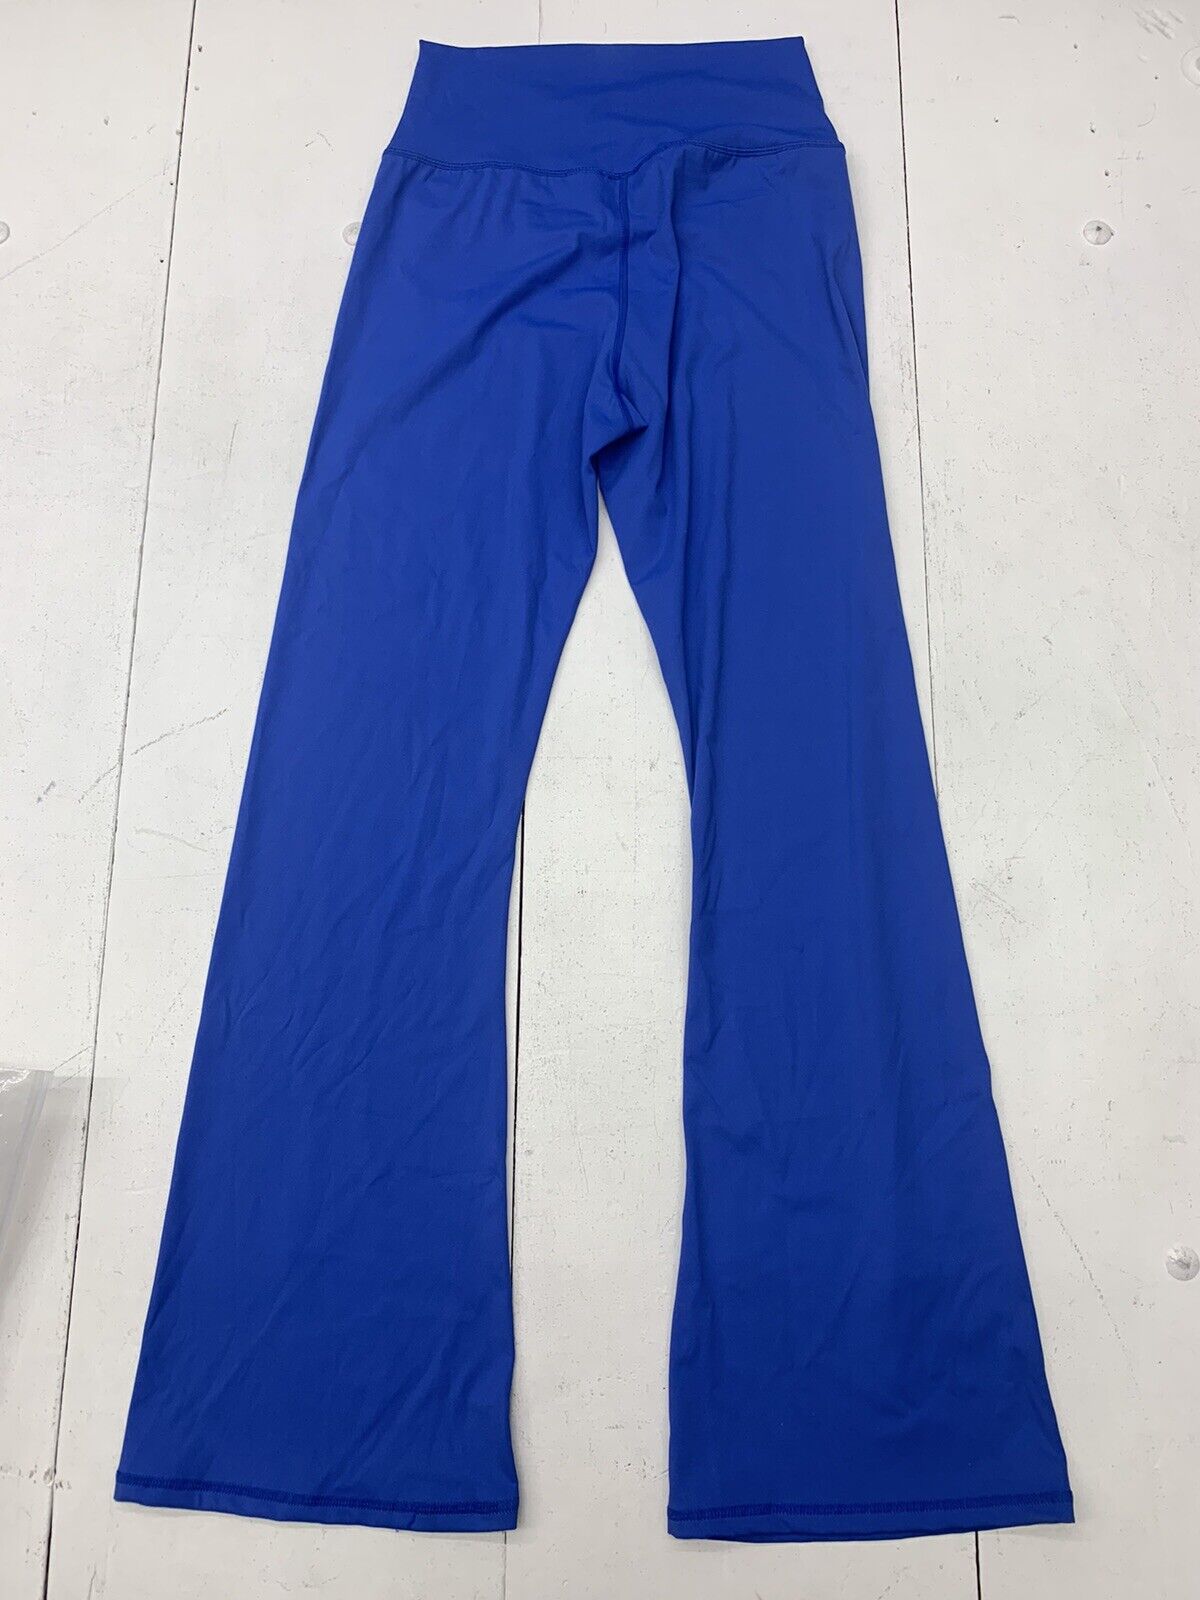 Unbranded Womens Blue High Waisted Athletic Leggings Size Large - beyond  exchange